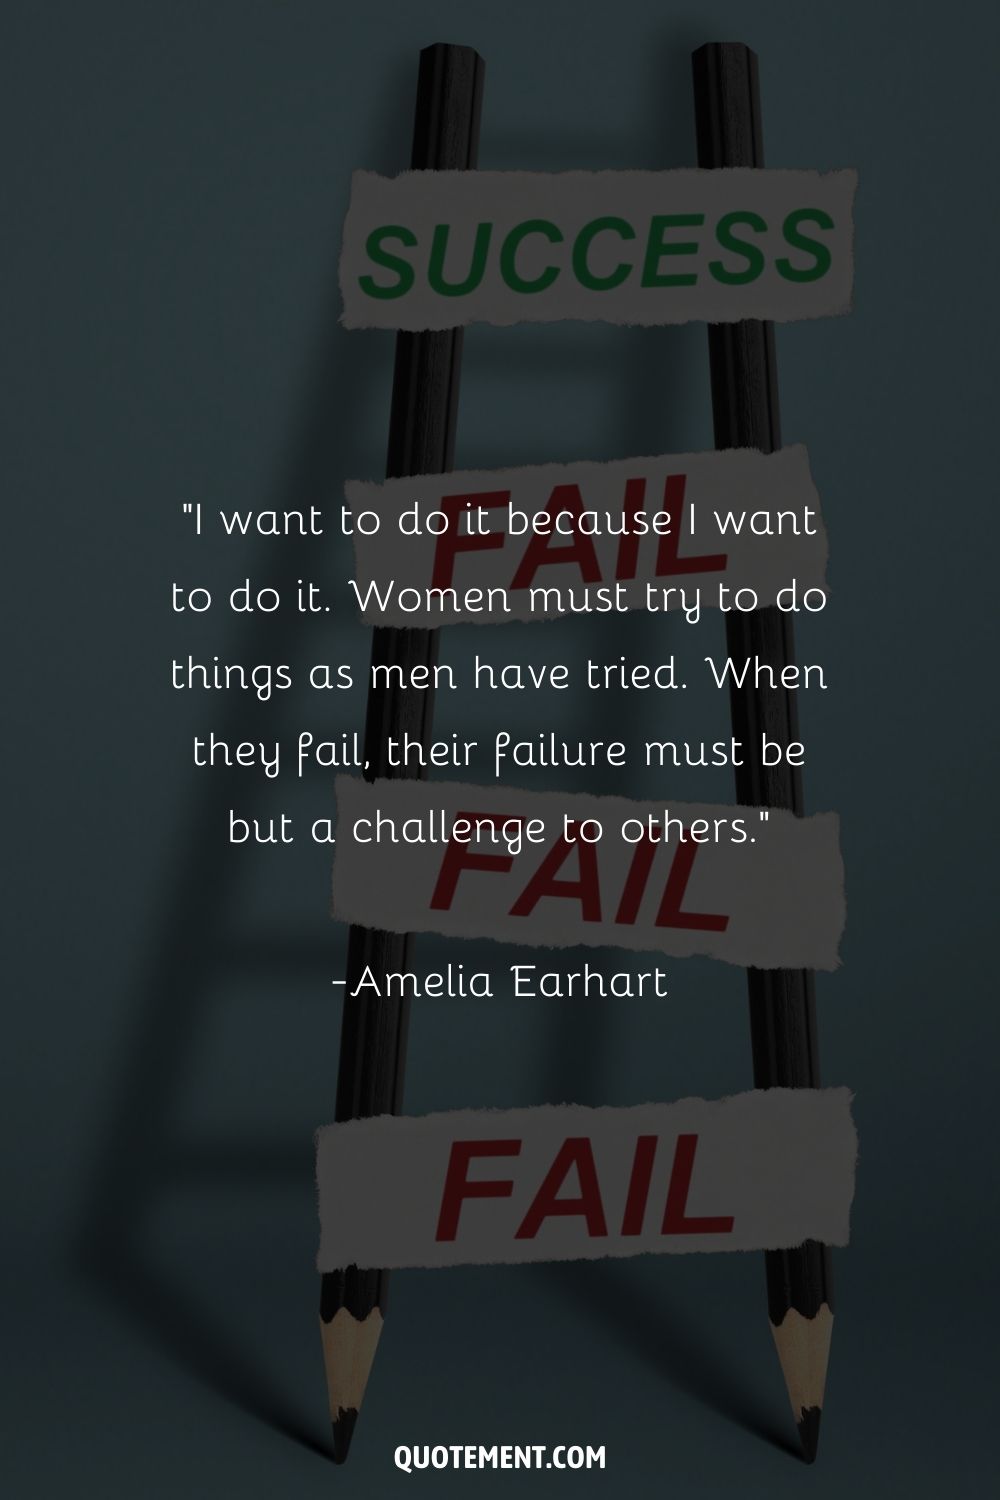 “I want to do it because I want to do it. Women must try to do things as men have tried. When they fail, their failure must be but a challenge to others.” ― Amelia Earhart